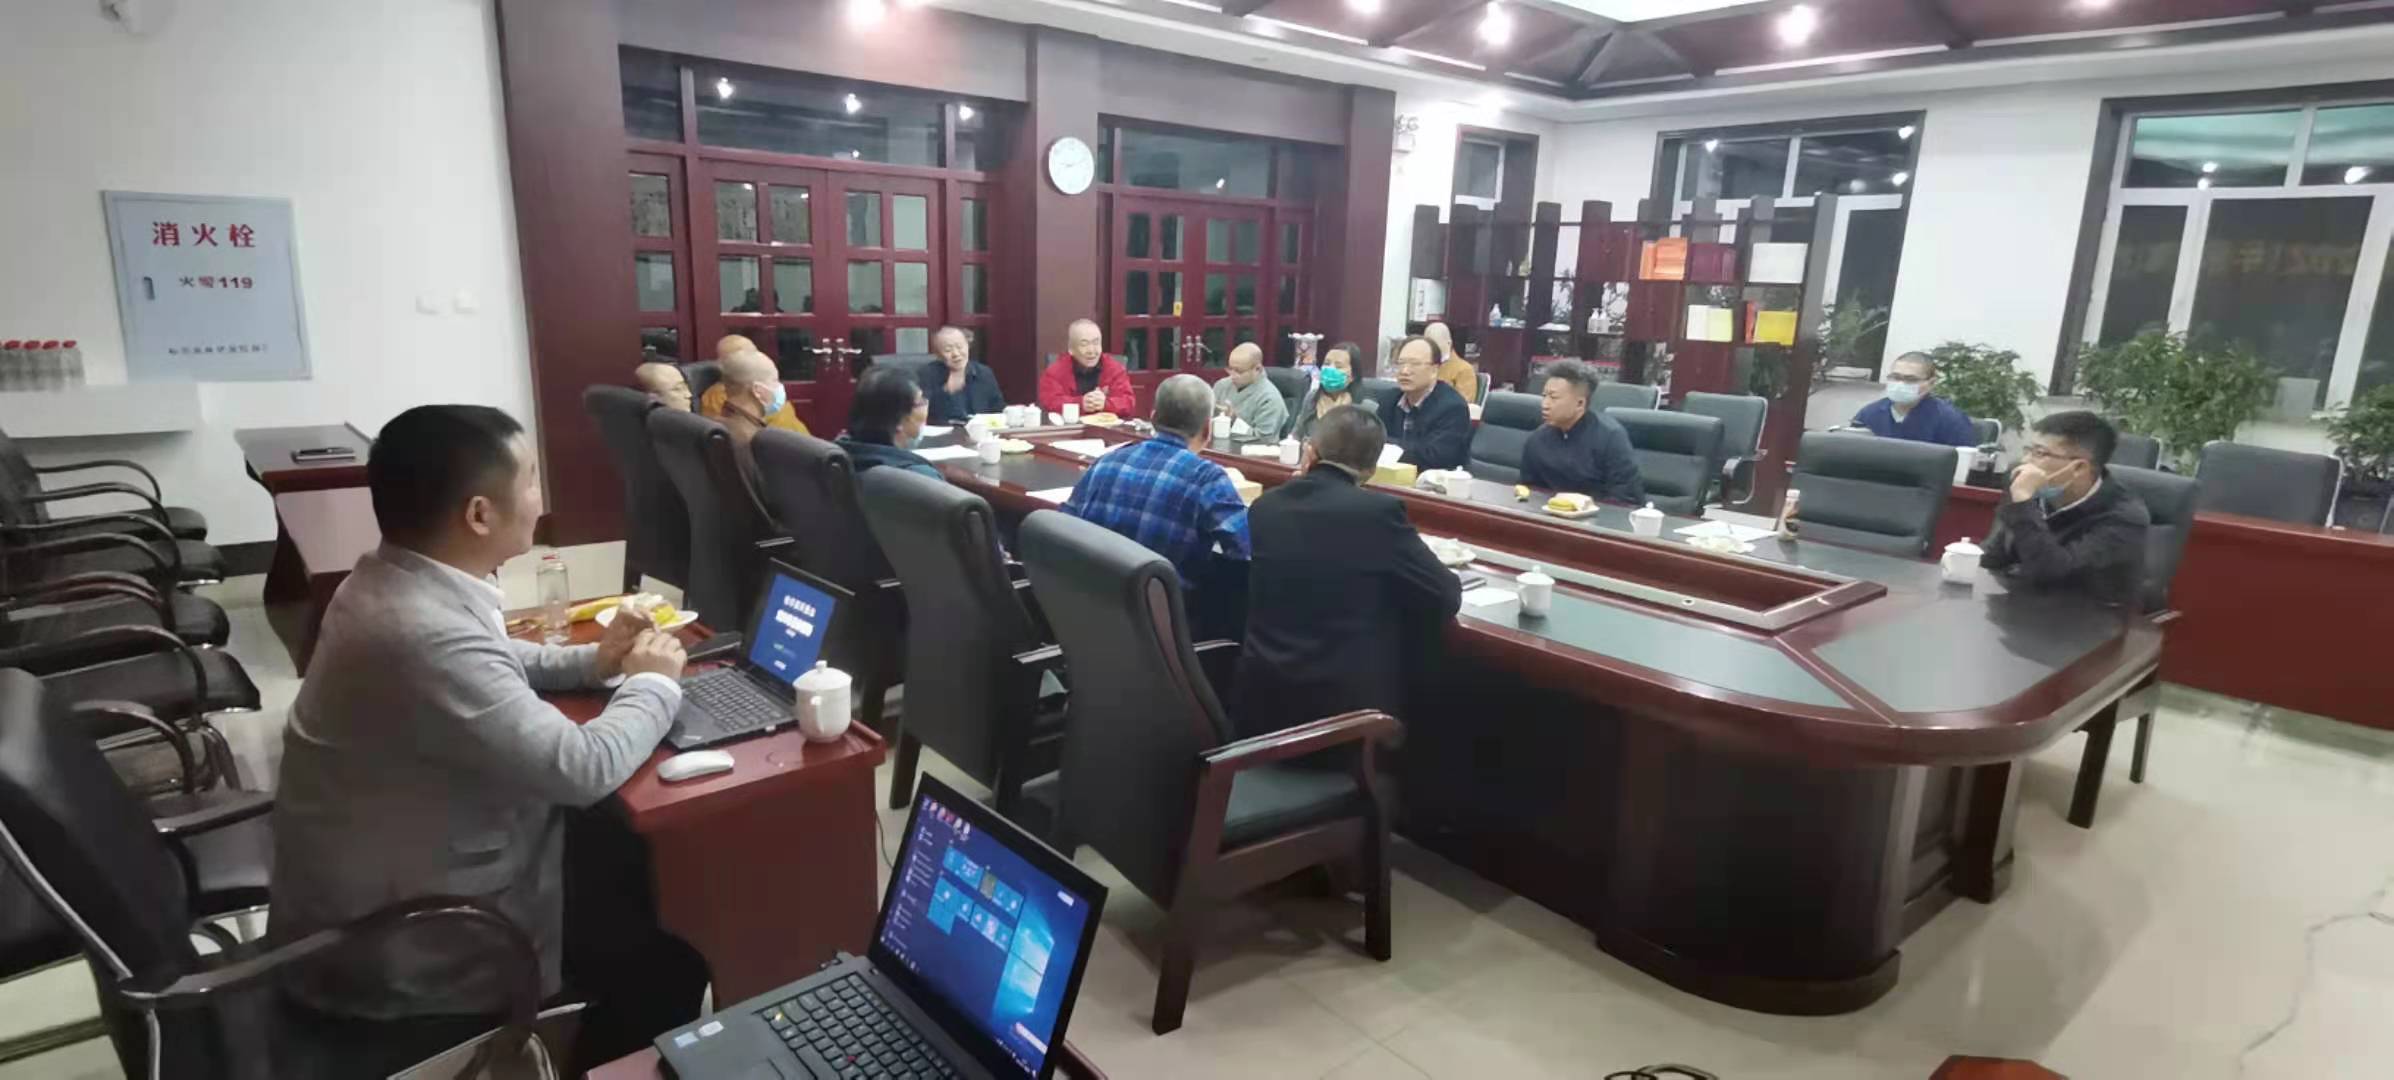 The interim report meeting of master plan of Harbin Longxing Temple compiled by druan was held in Ha